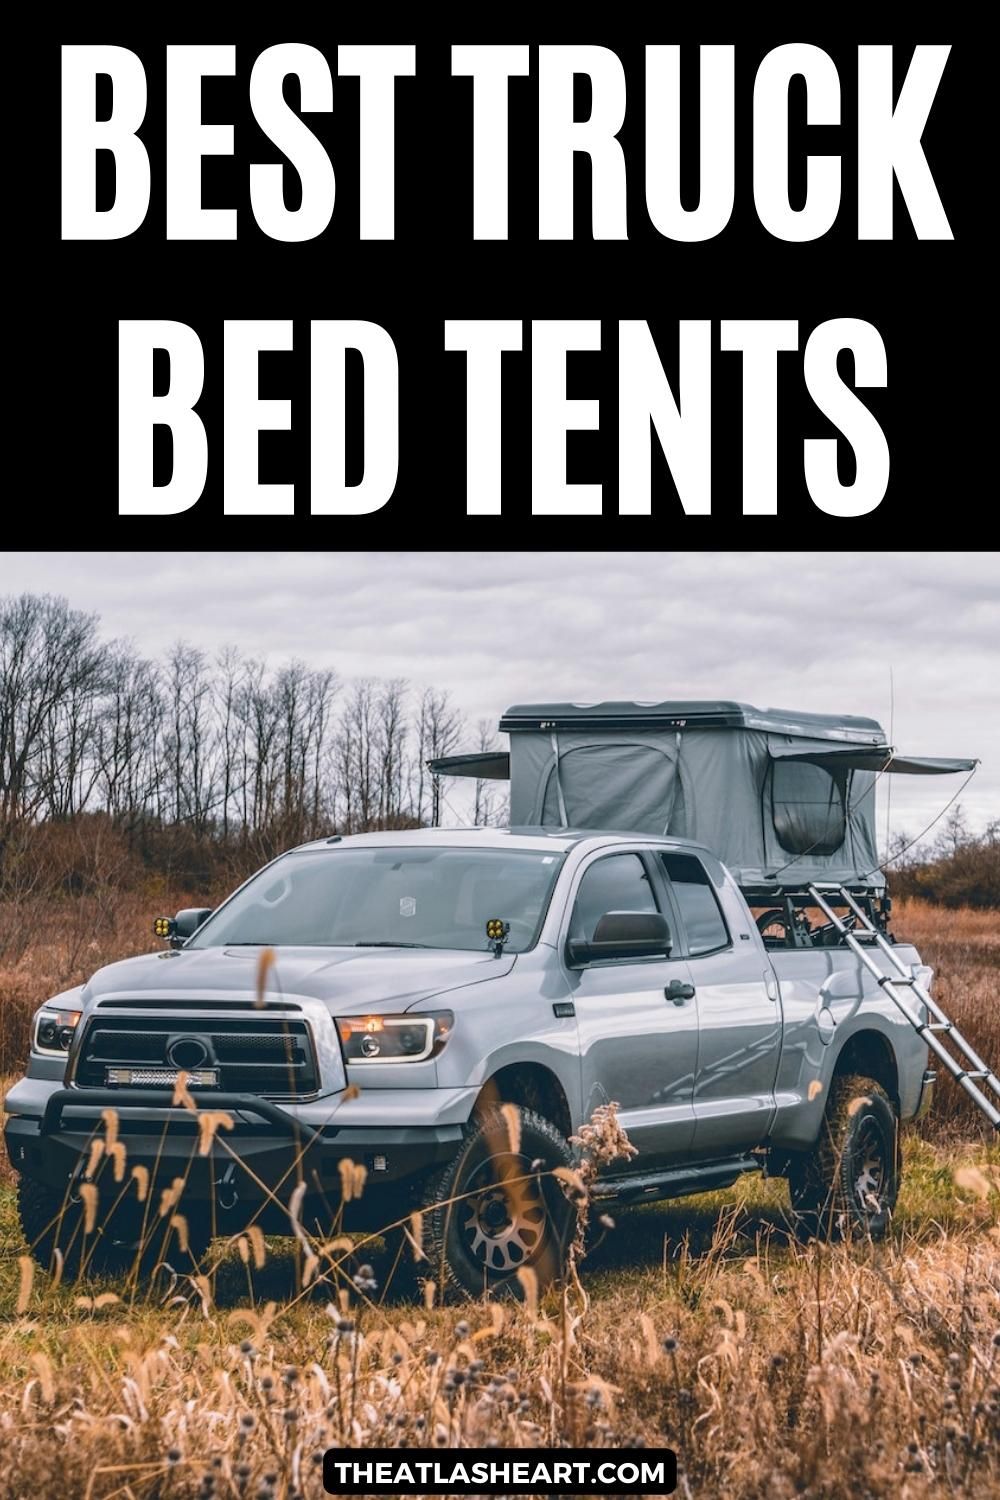 A grey truck with a grey truck bed tent parked ina wintry fieled, with the text overlay, "Best Truck Bed Tents."